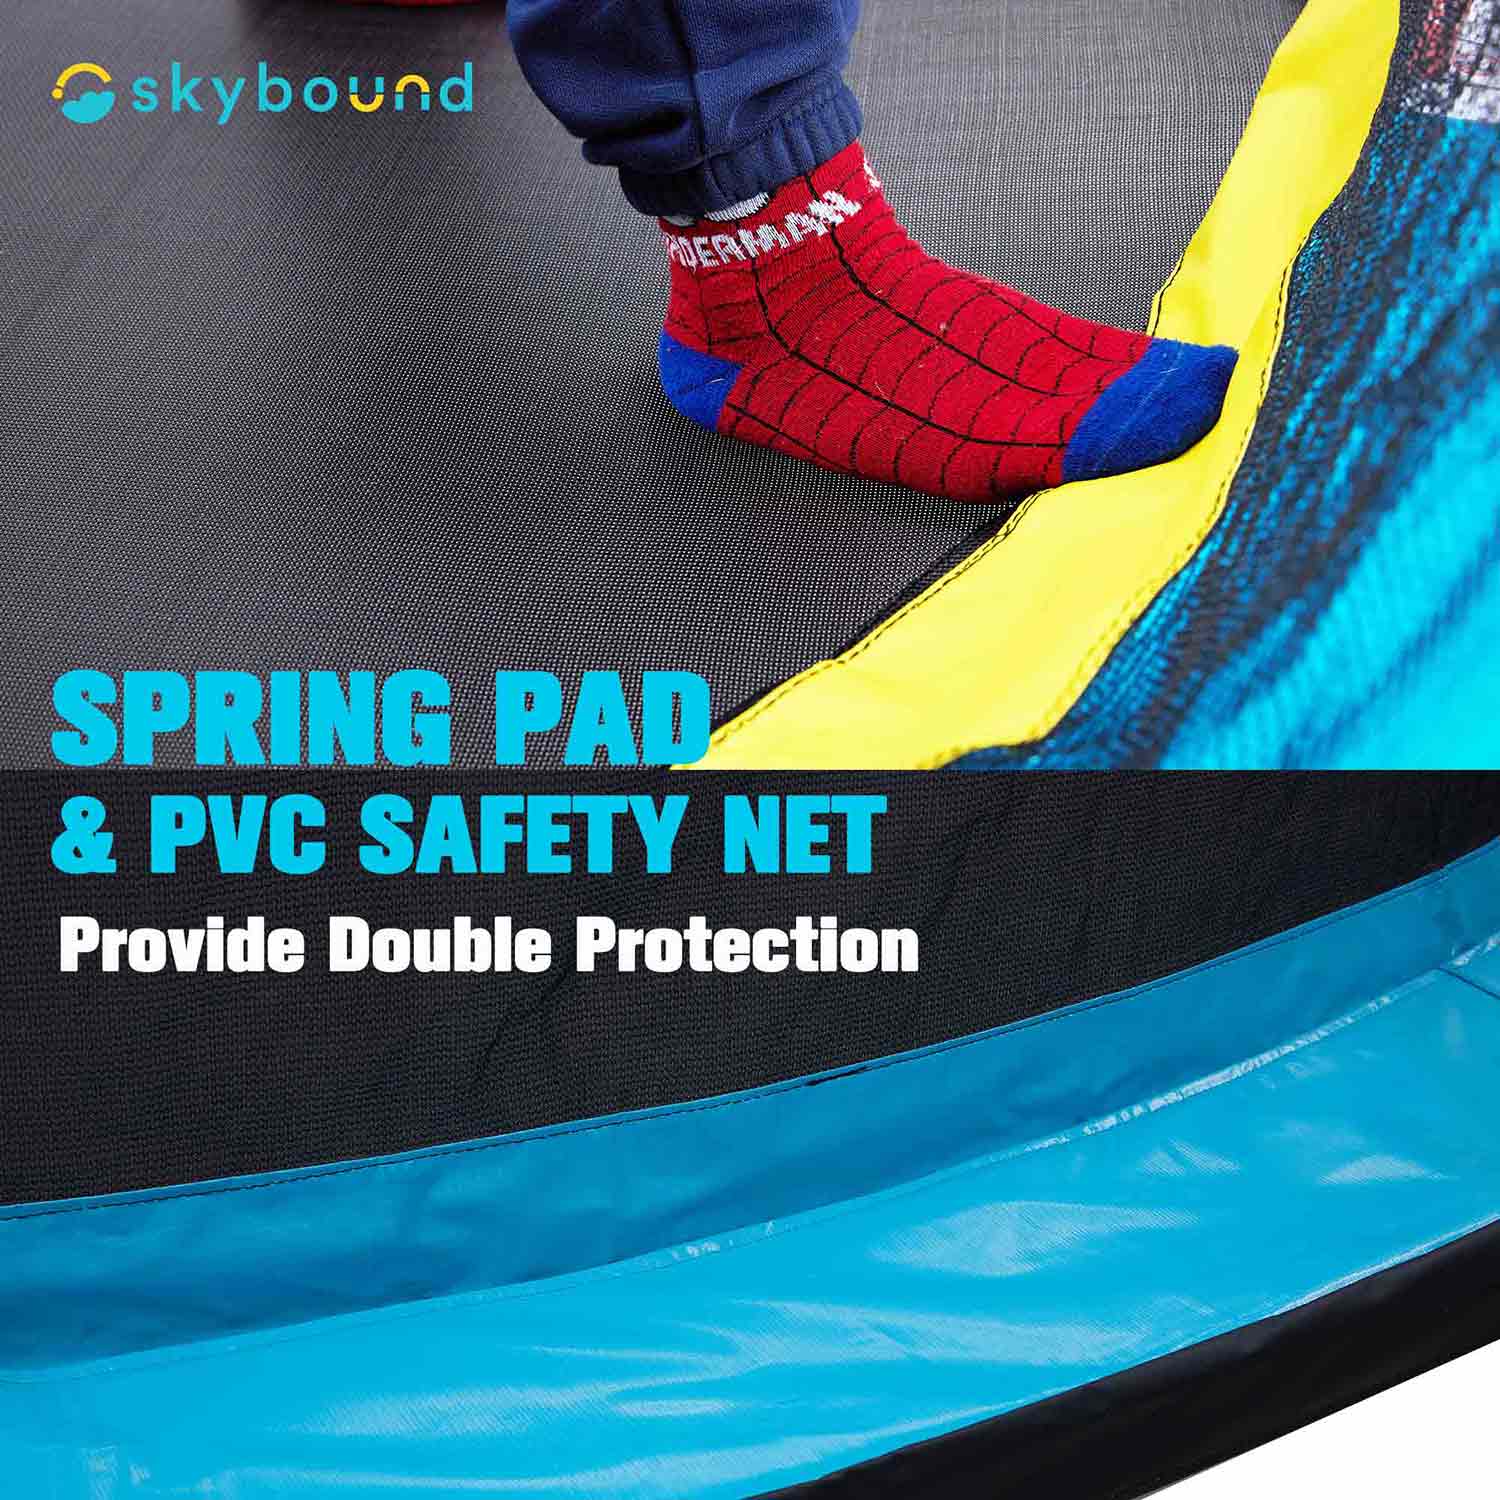 SkyBound-kids-Trampoline-14ft-Spring-PAD-and-PVC-Safety-Net-Provide-Double-Protection